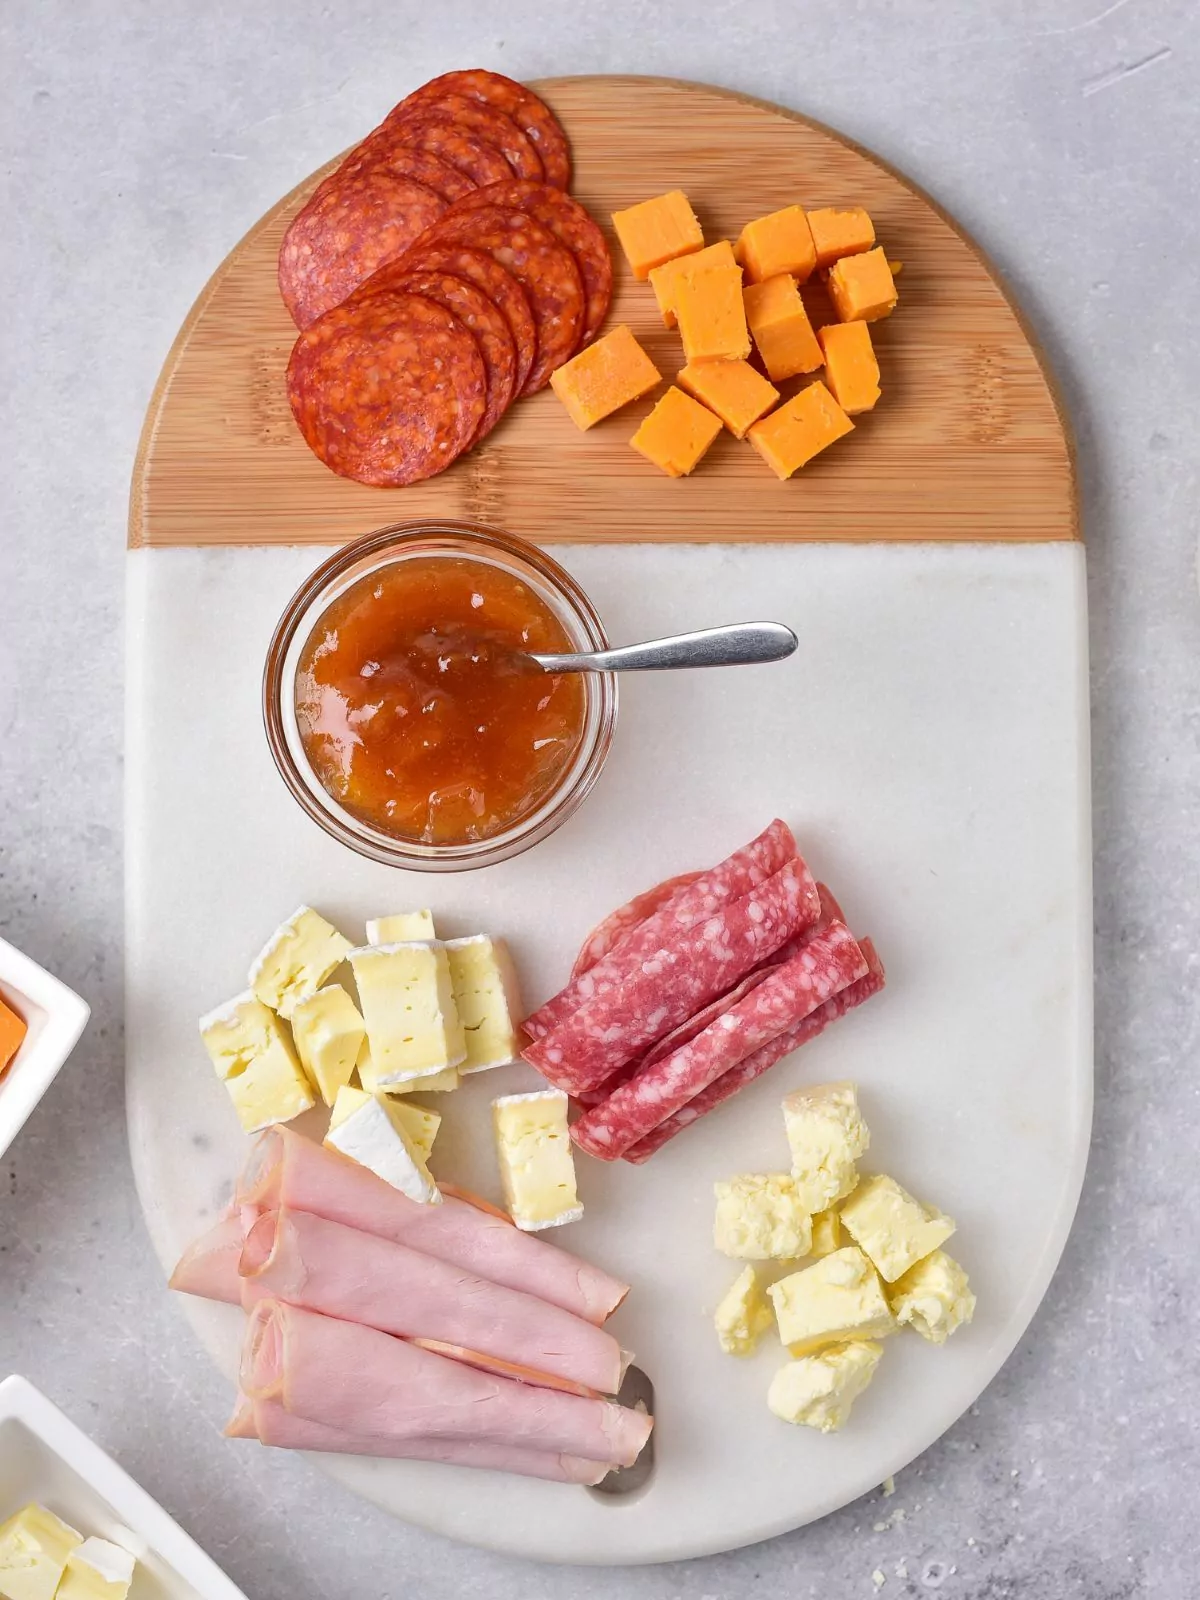 cheese board platter with salami, ham and chutney.